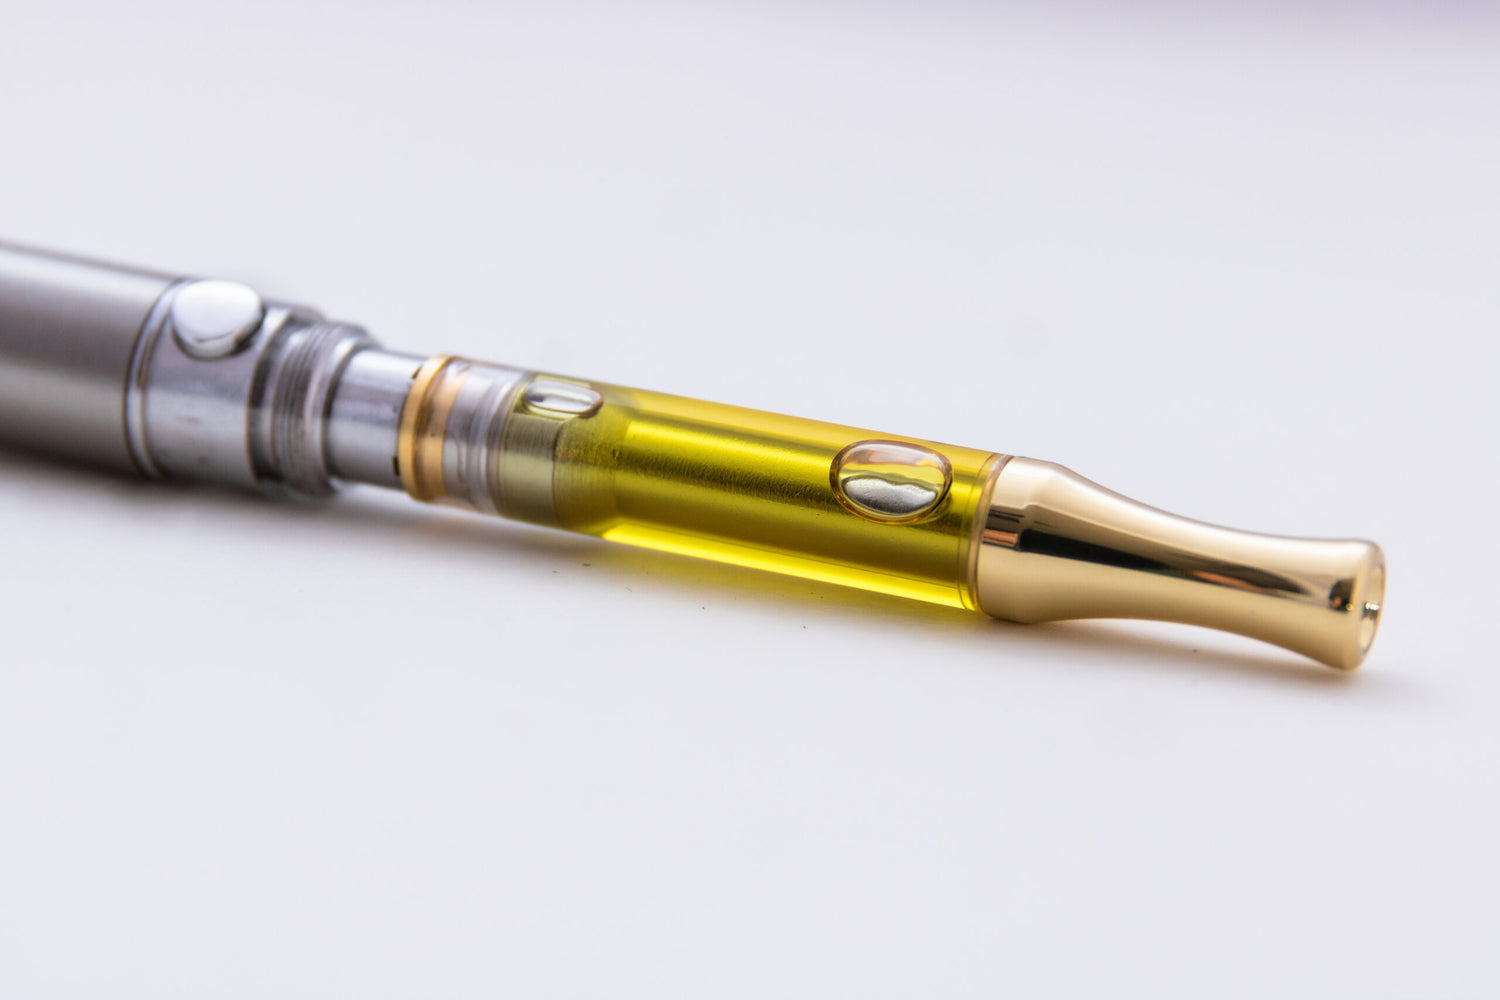 What is an Oil Pen and Why is it So Popular? - Read More - HEMPER